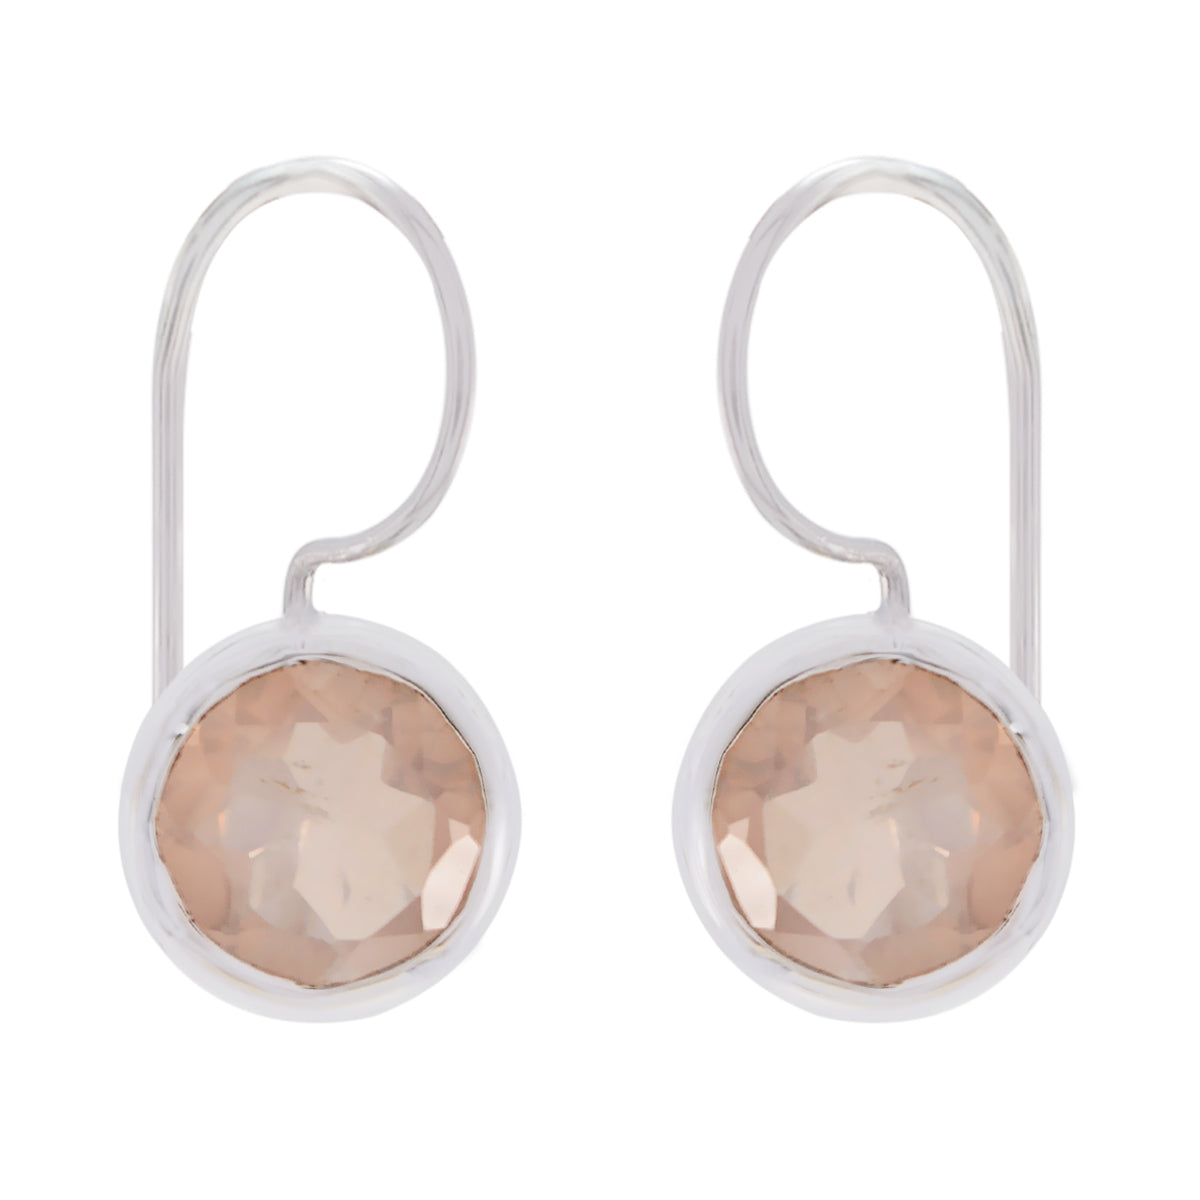 Riyo Natural Gemstone round Faceted Pink Rose Quartz Silver Earring cyber Monday gift